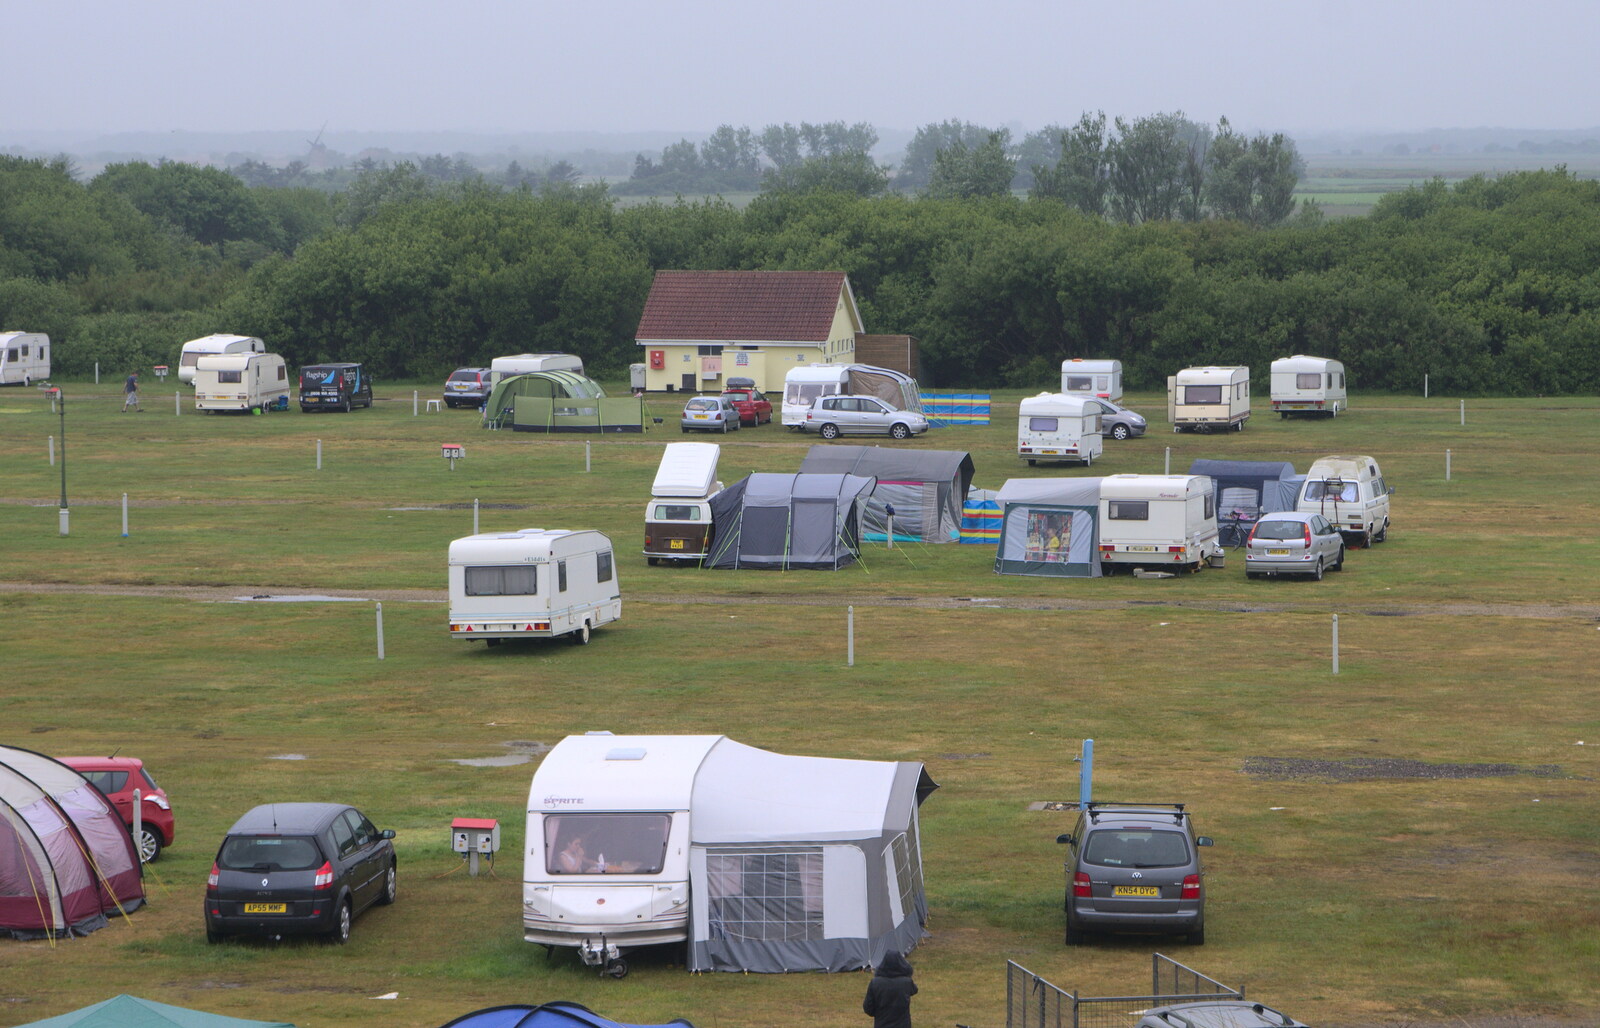 A view of our spot from up on the dunes from A Wet Weekend of Camping, Waxham Sands, Norfolk - 13th June 2015